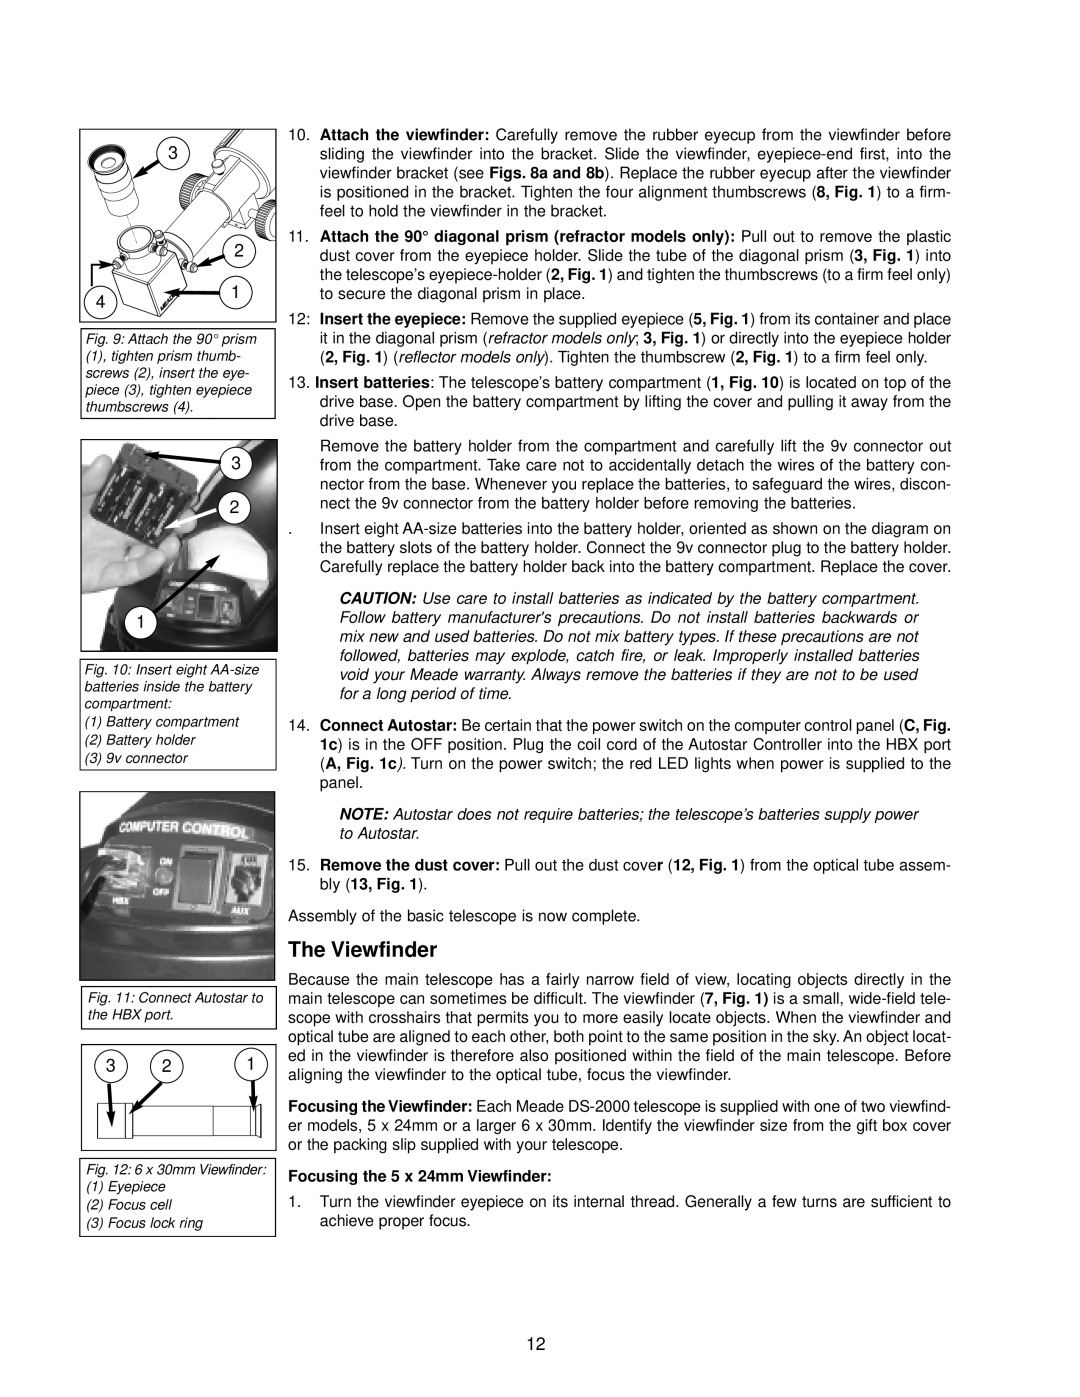 Meade DS-2000 instruction manual The Viewfinder, Focusing the 5 x 24mm Viewfinder 